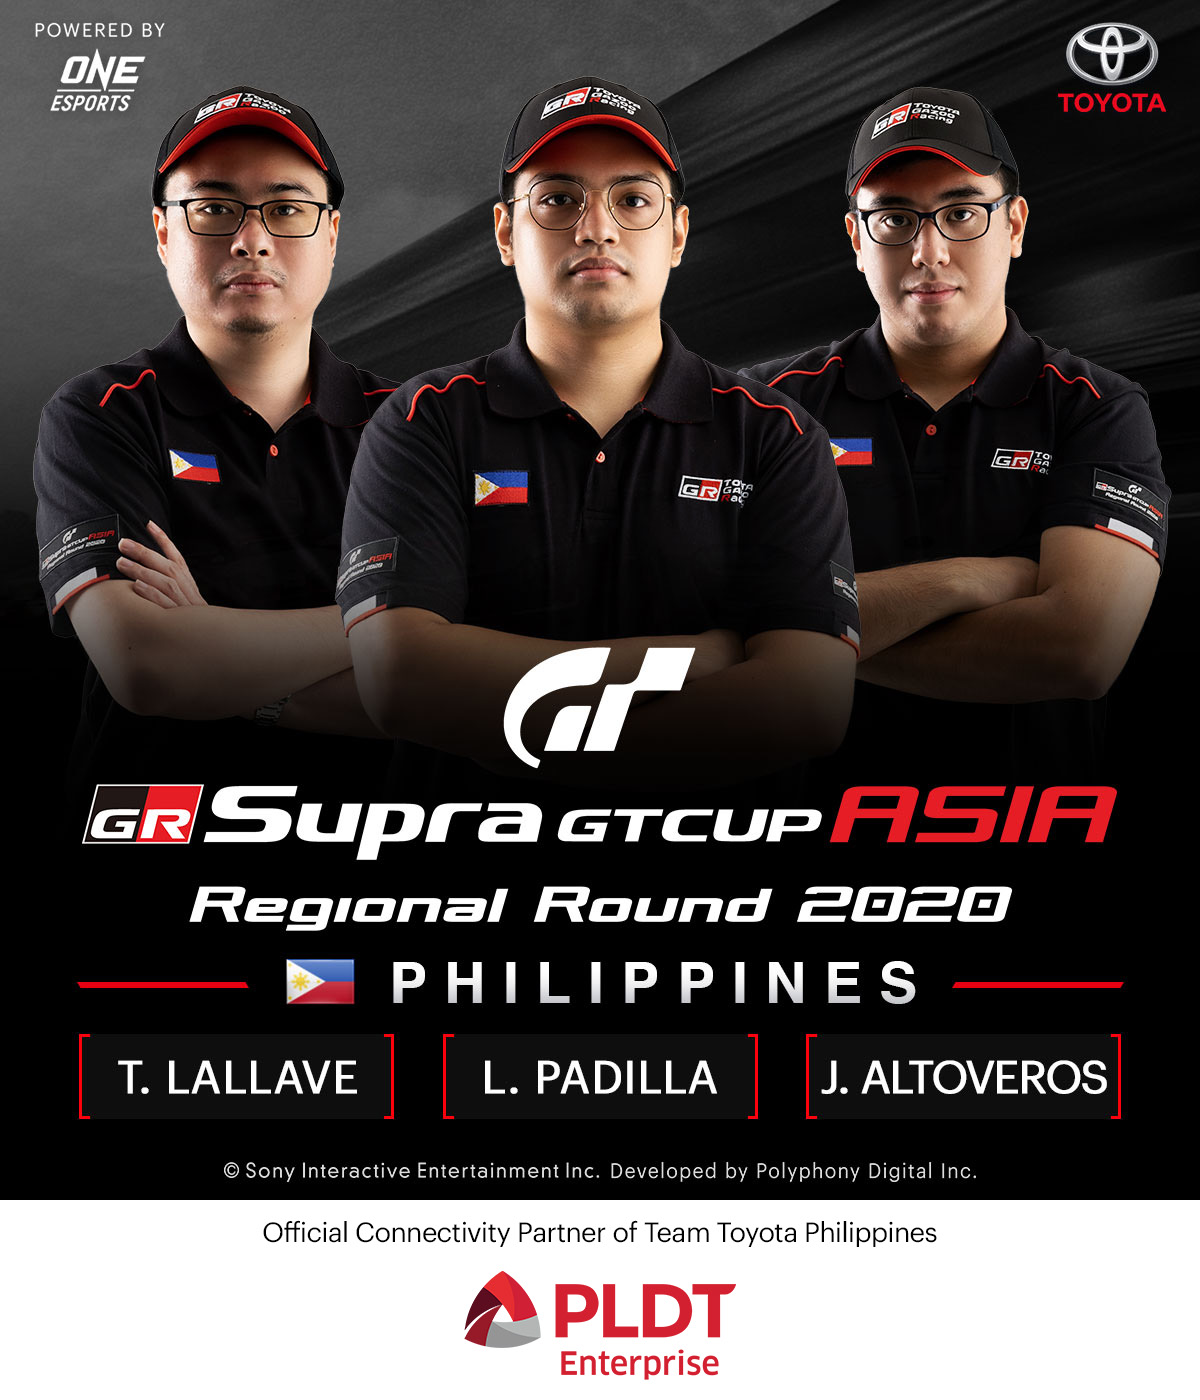 GR SUPRA GT CUP ASIA FINALS TEAM PHILIPPINES